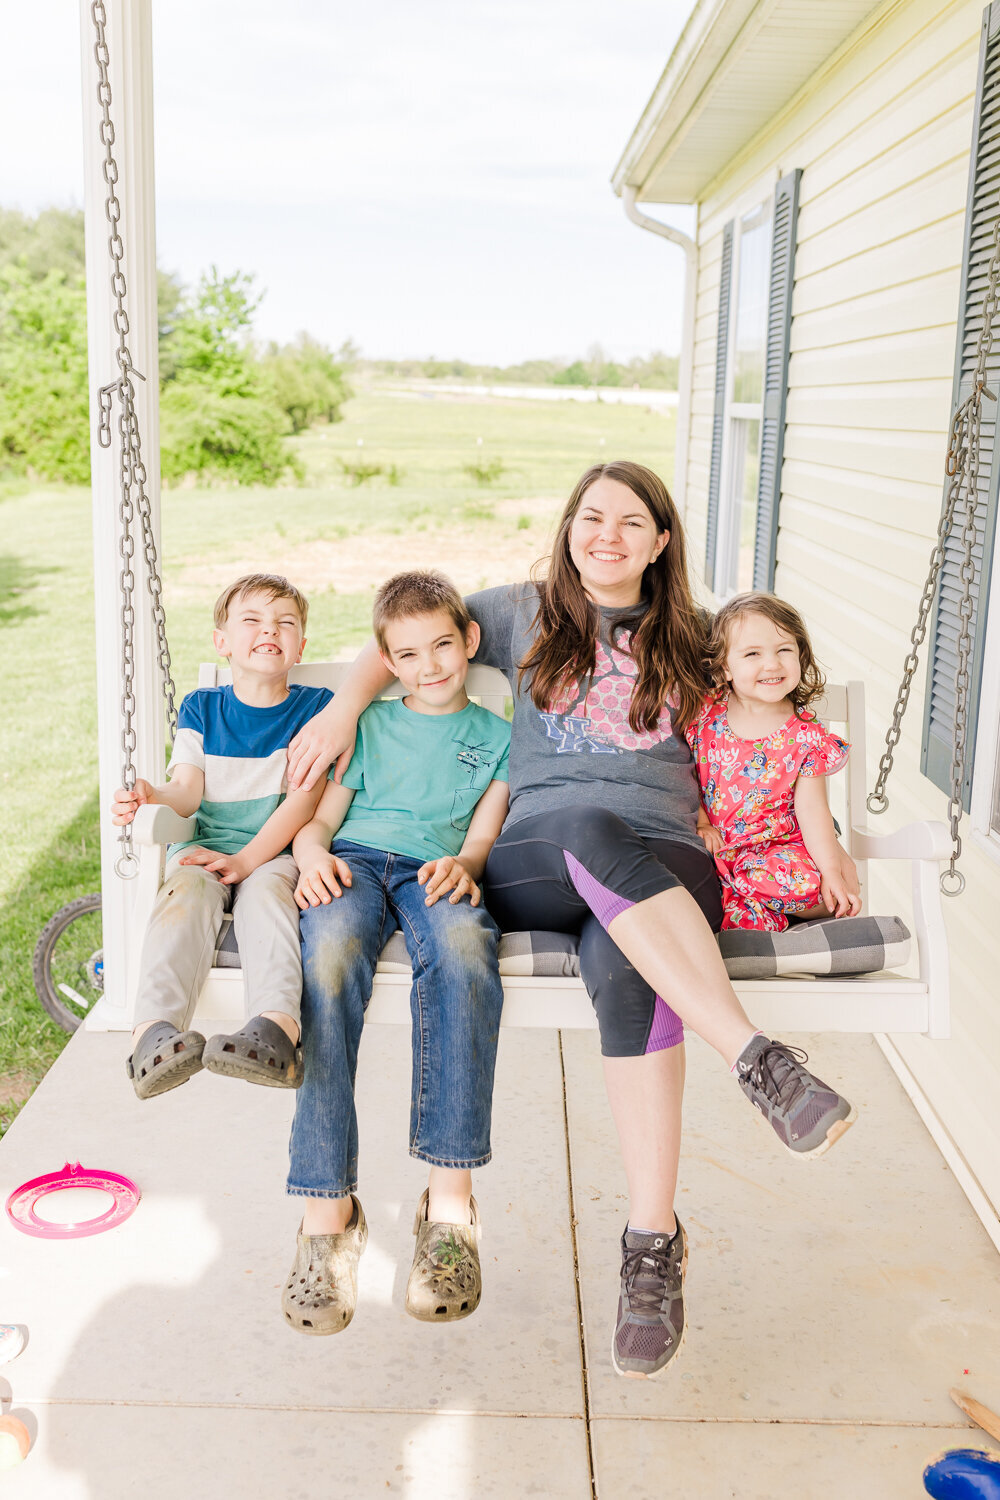 myself with my three kids sitting on the porch swing